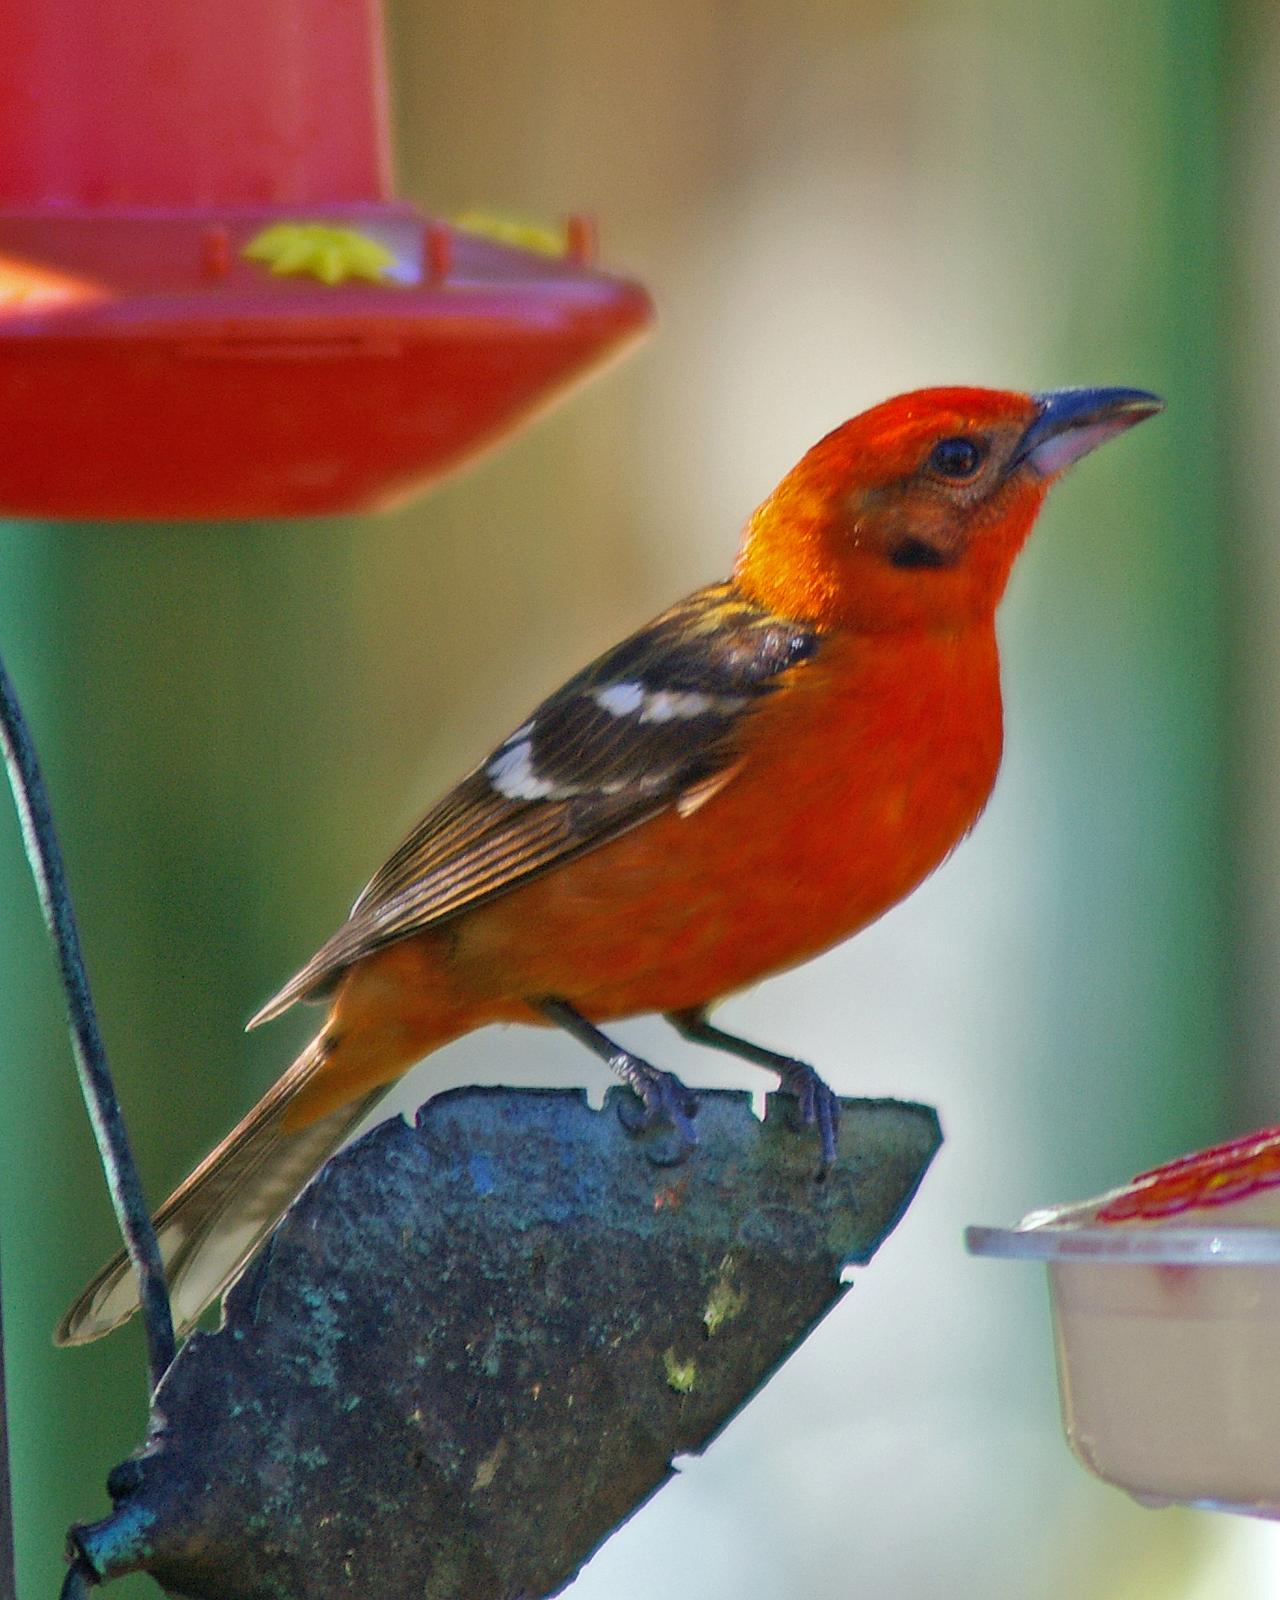 Flame-colored Tanager Photo by Robert Polkinghorn